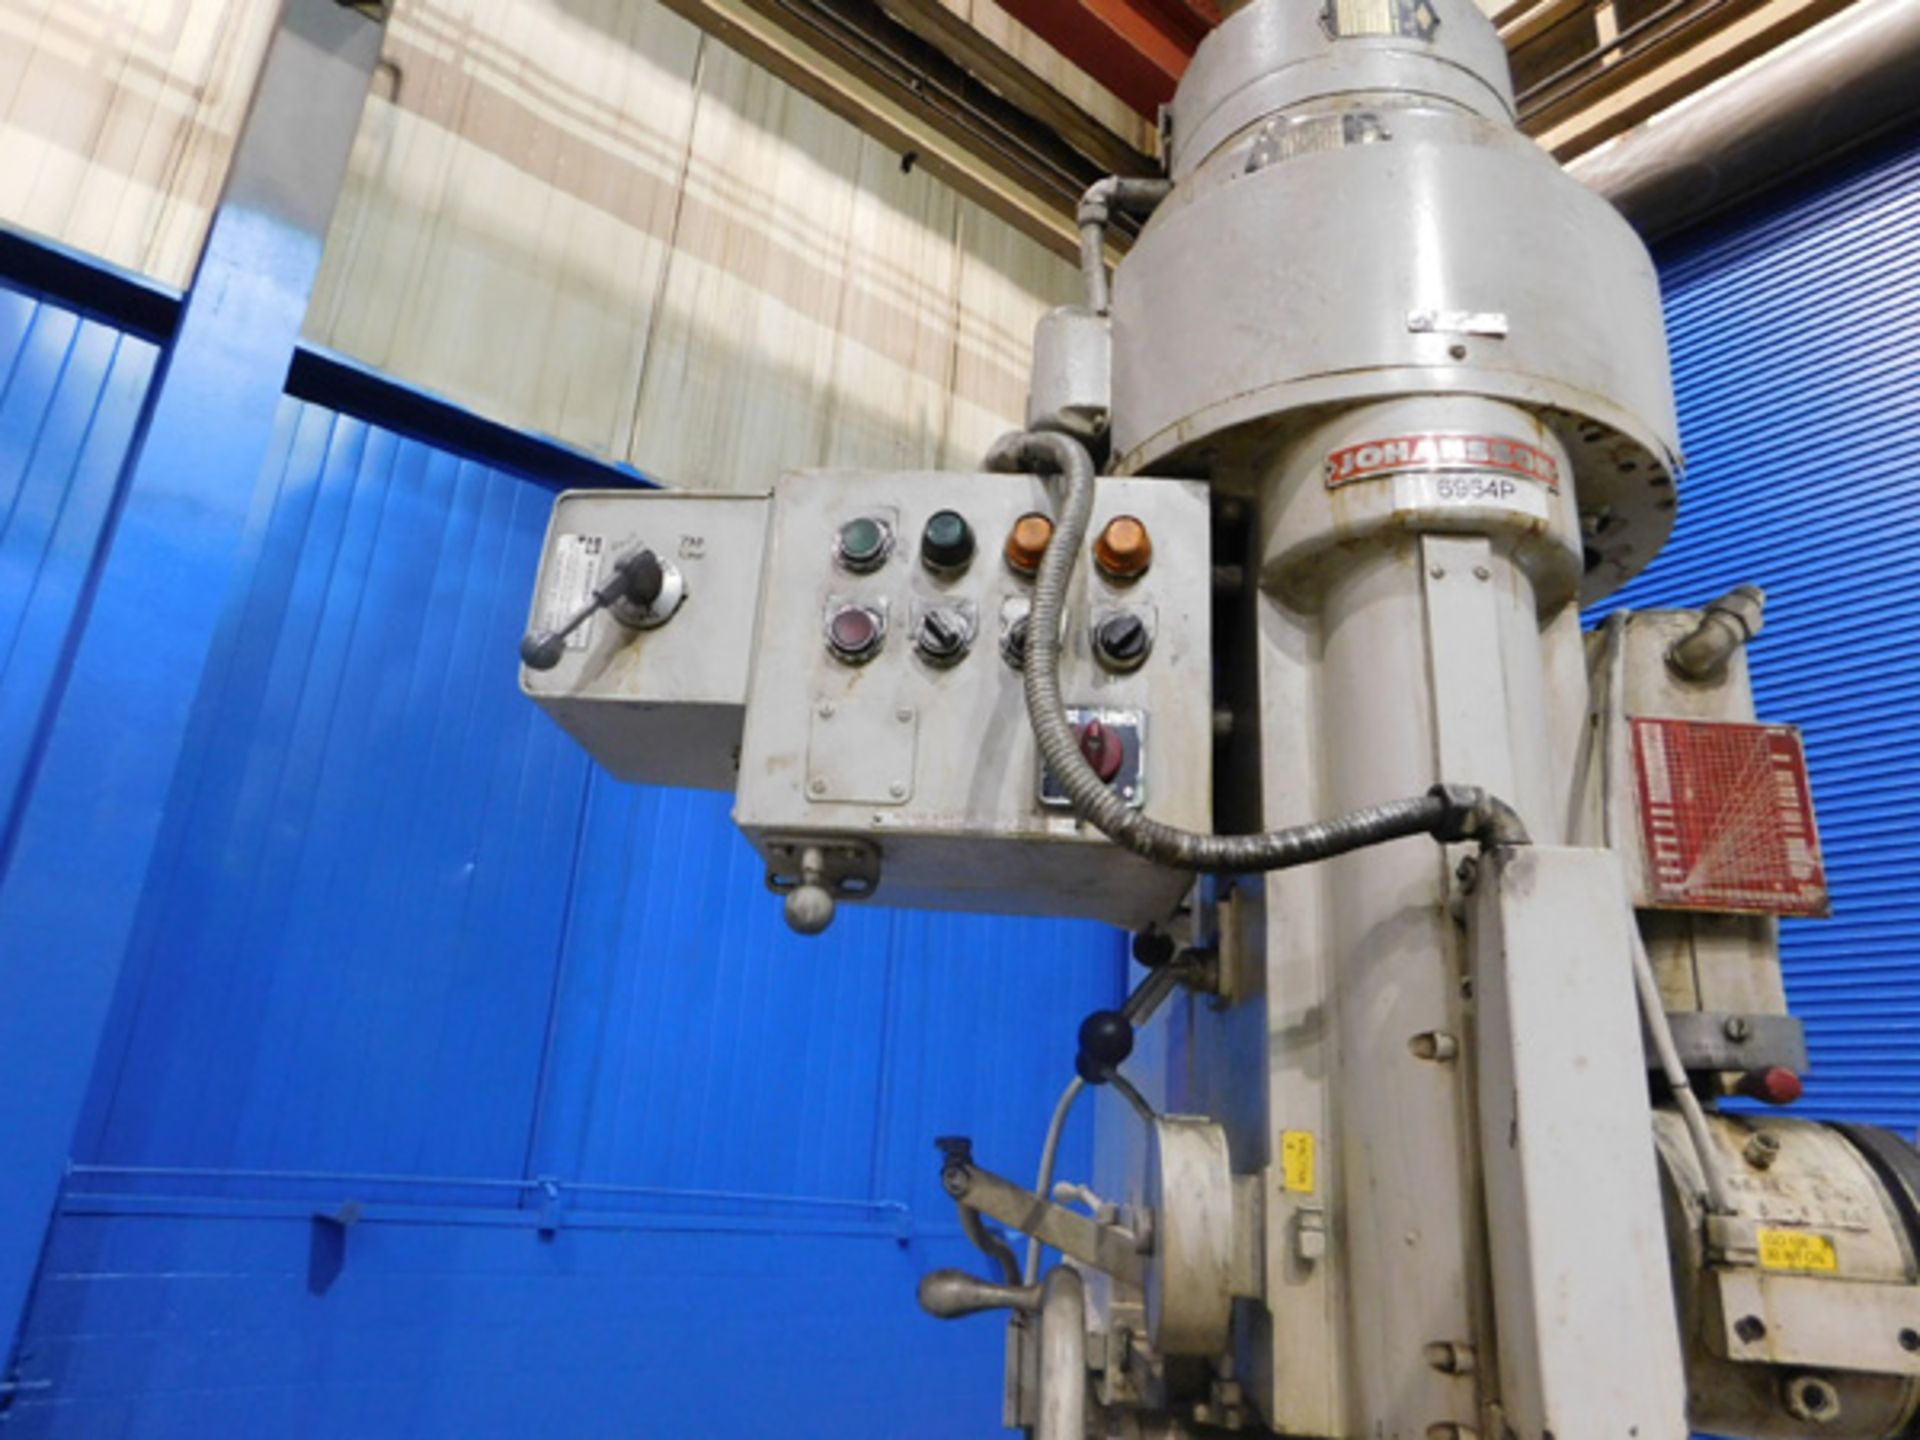 Johansson Radial Arm Drill | 3' x 11", Mdl: N/A, S/N: 51621 - 6964P - Image 2 of 9